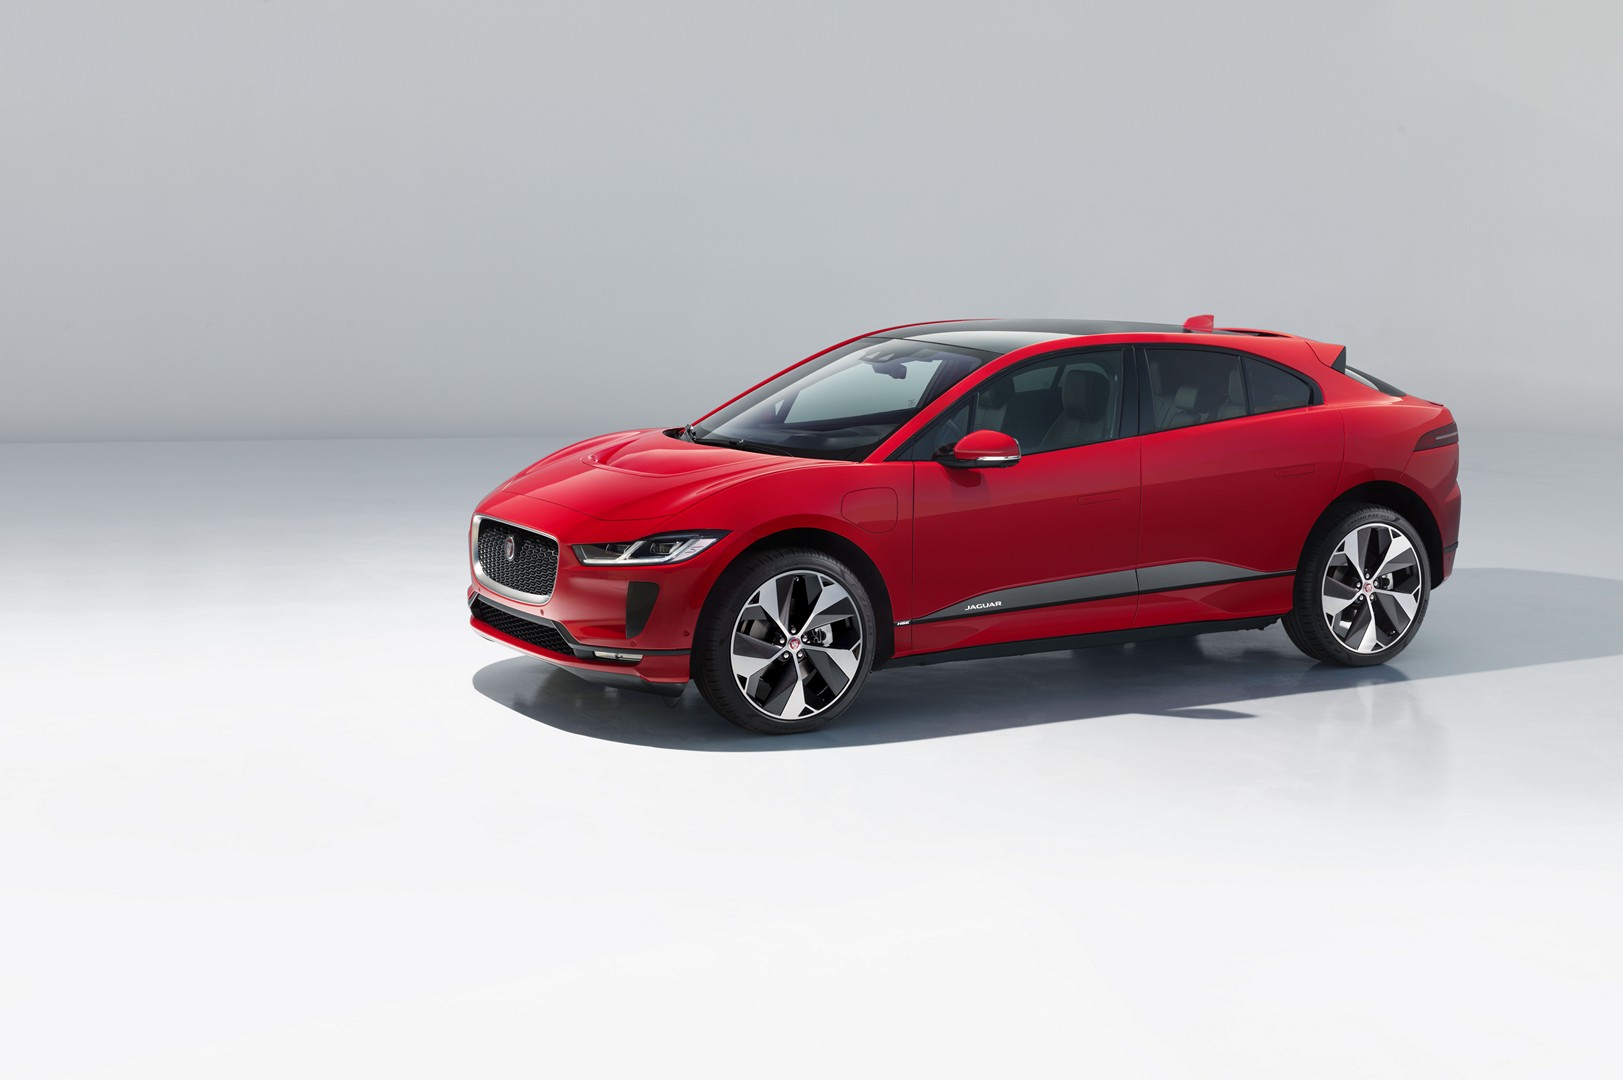 https://s1.cdn.autoevolution.com/images/news/gallery/2020-jaguar-i-pace-update-offers-234-miles-of-range-thanks-to-etrophy-know-how_5.jpg